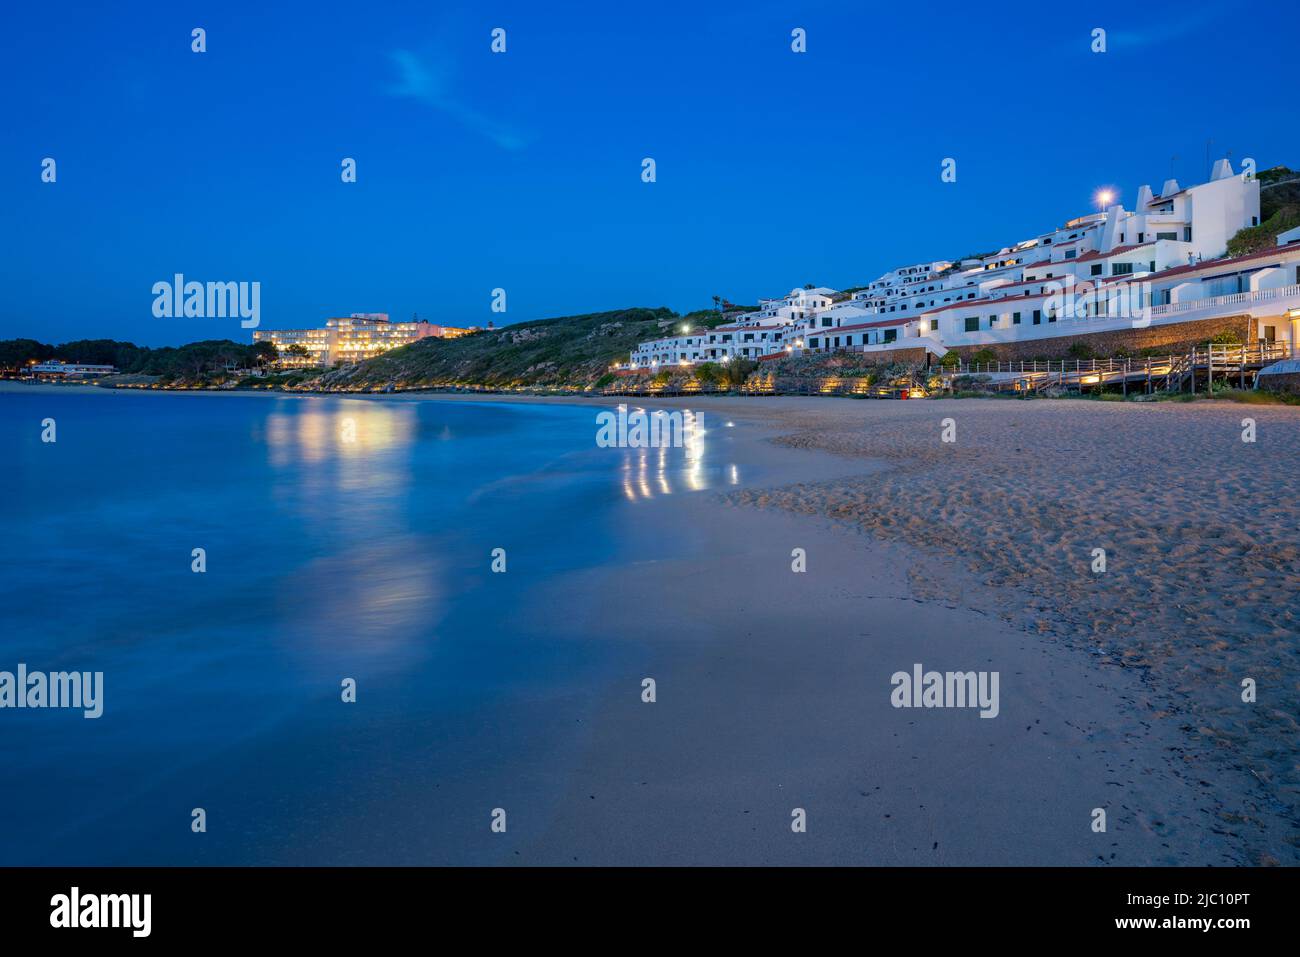 Hotels and whitewashed buildings overlooking beach at dusk in Arenal d'en Castell, Es Mercadal, Memorca, Balearic Islands, Spain, Europe Stock Photo